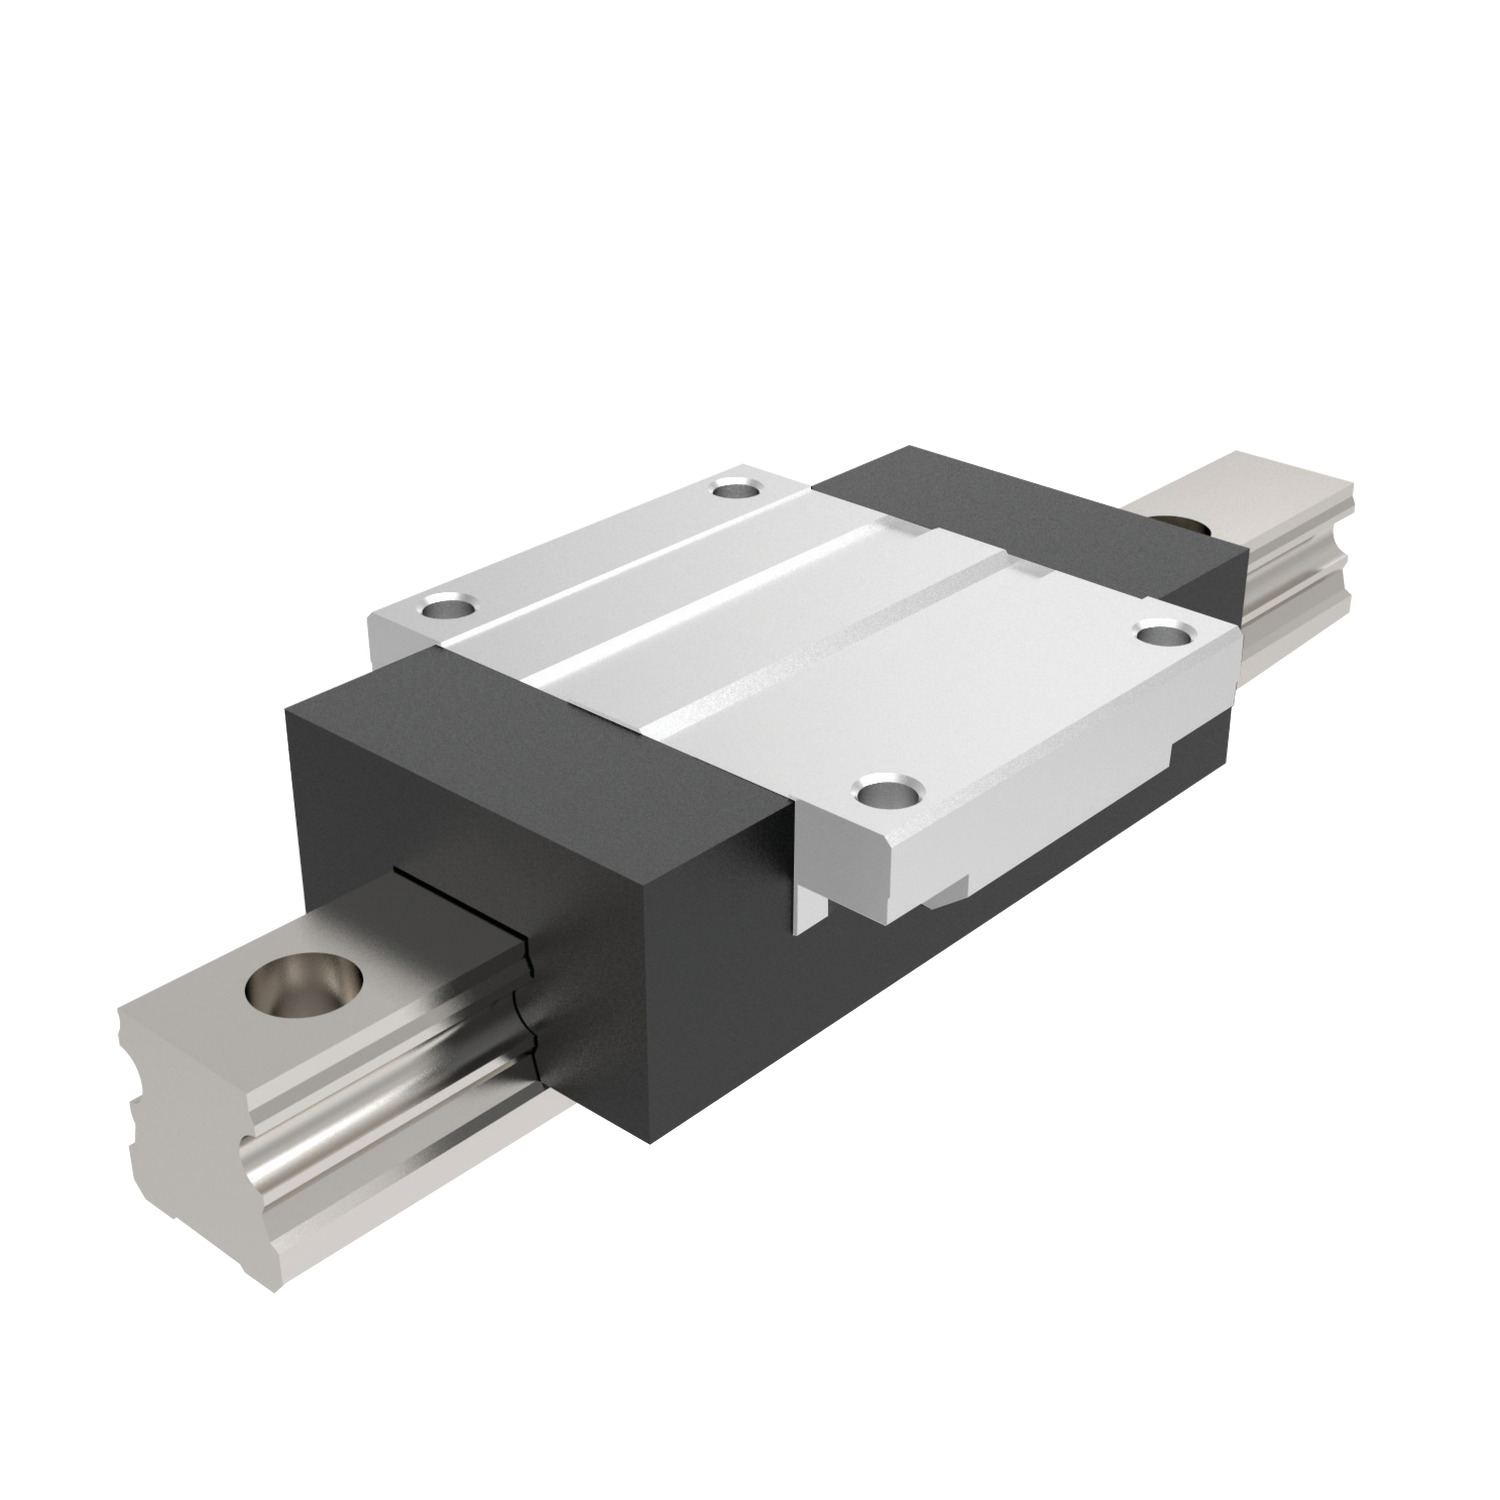 Aluminium Guideways Our anodised aluminium Linear Guides offer a 60% weight reduction over standard steel or stainless steel. They contain hardened stainless steel raceways for added durability. 15, 20 and 25mm versions available. Compatible with standard carriages (e.g. L1016.F) or special aluminium carriages L1018.F and L1018.U.